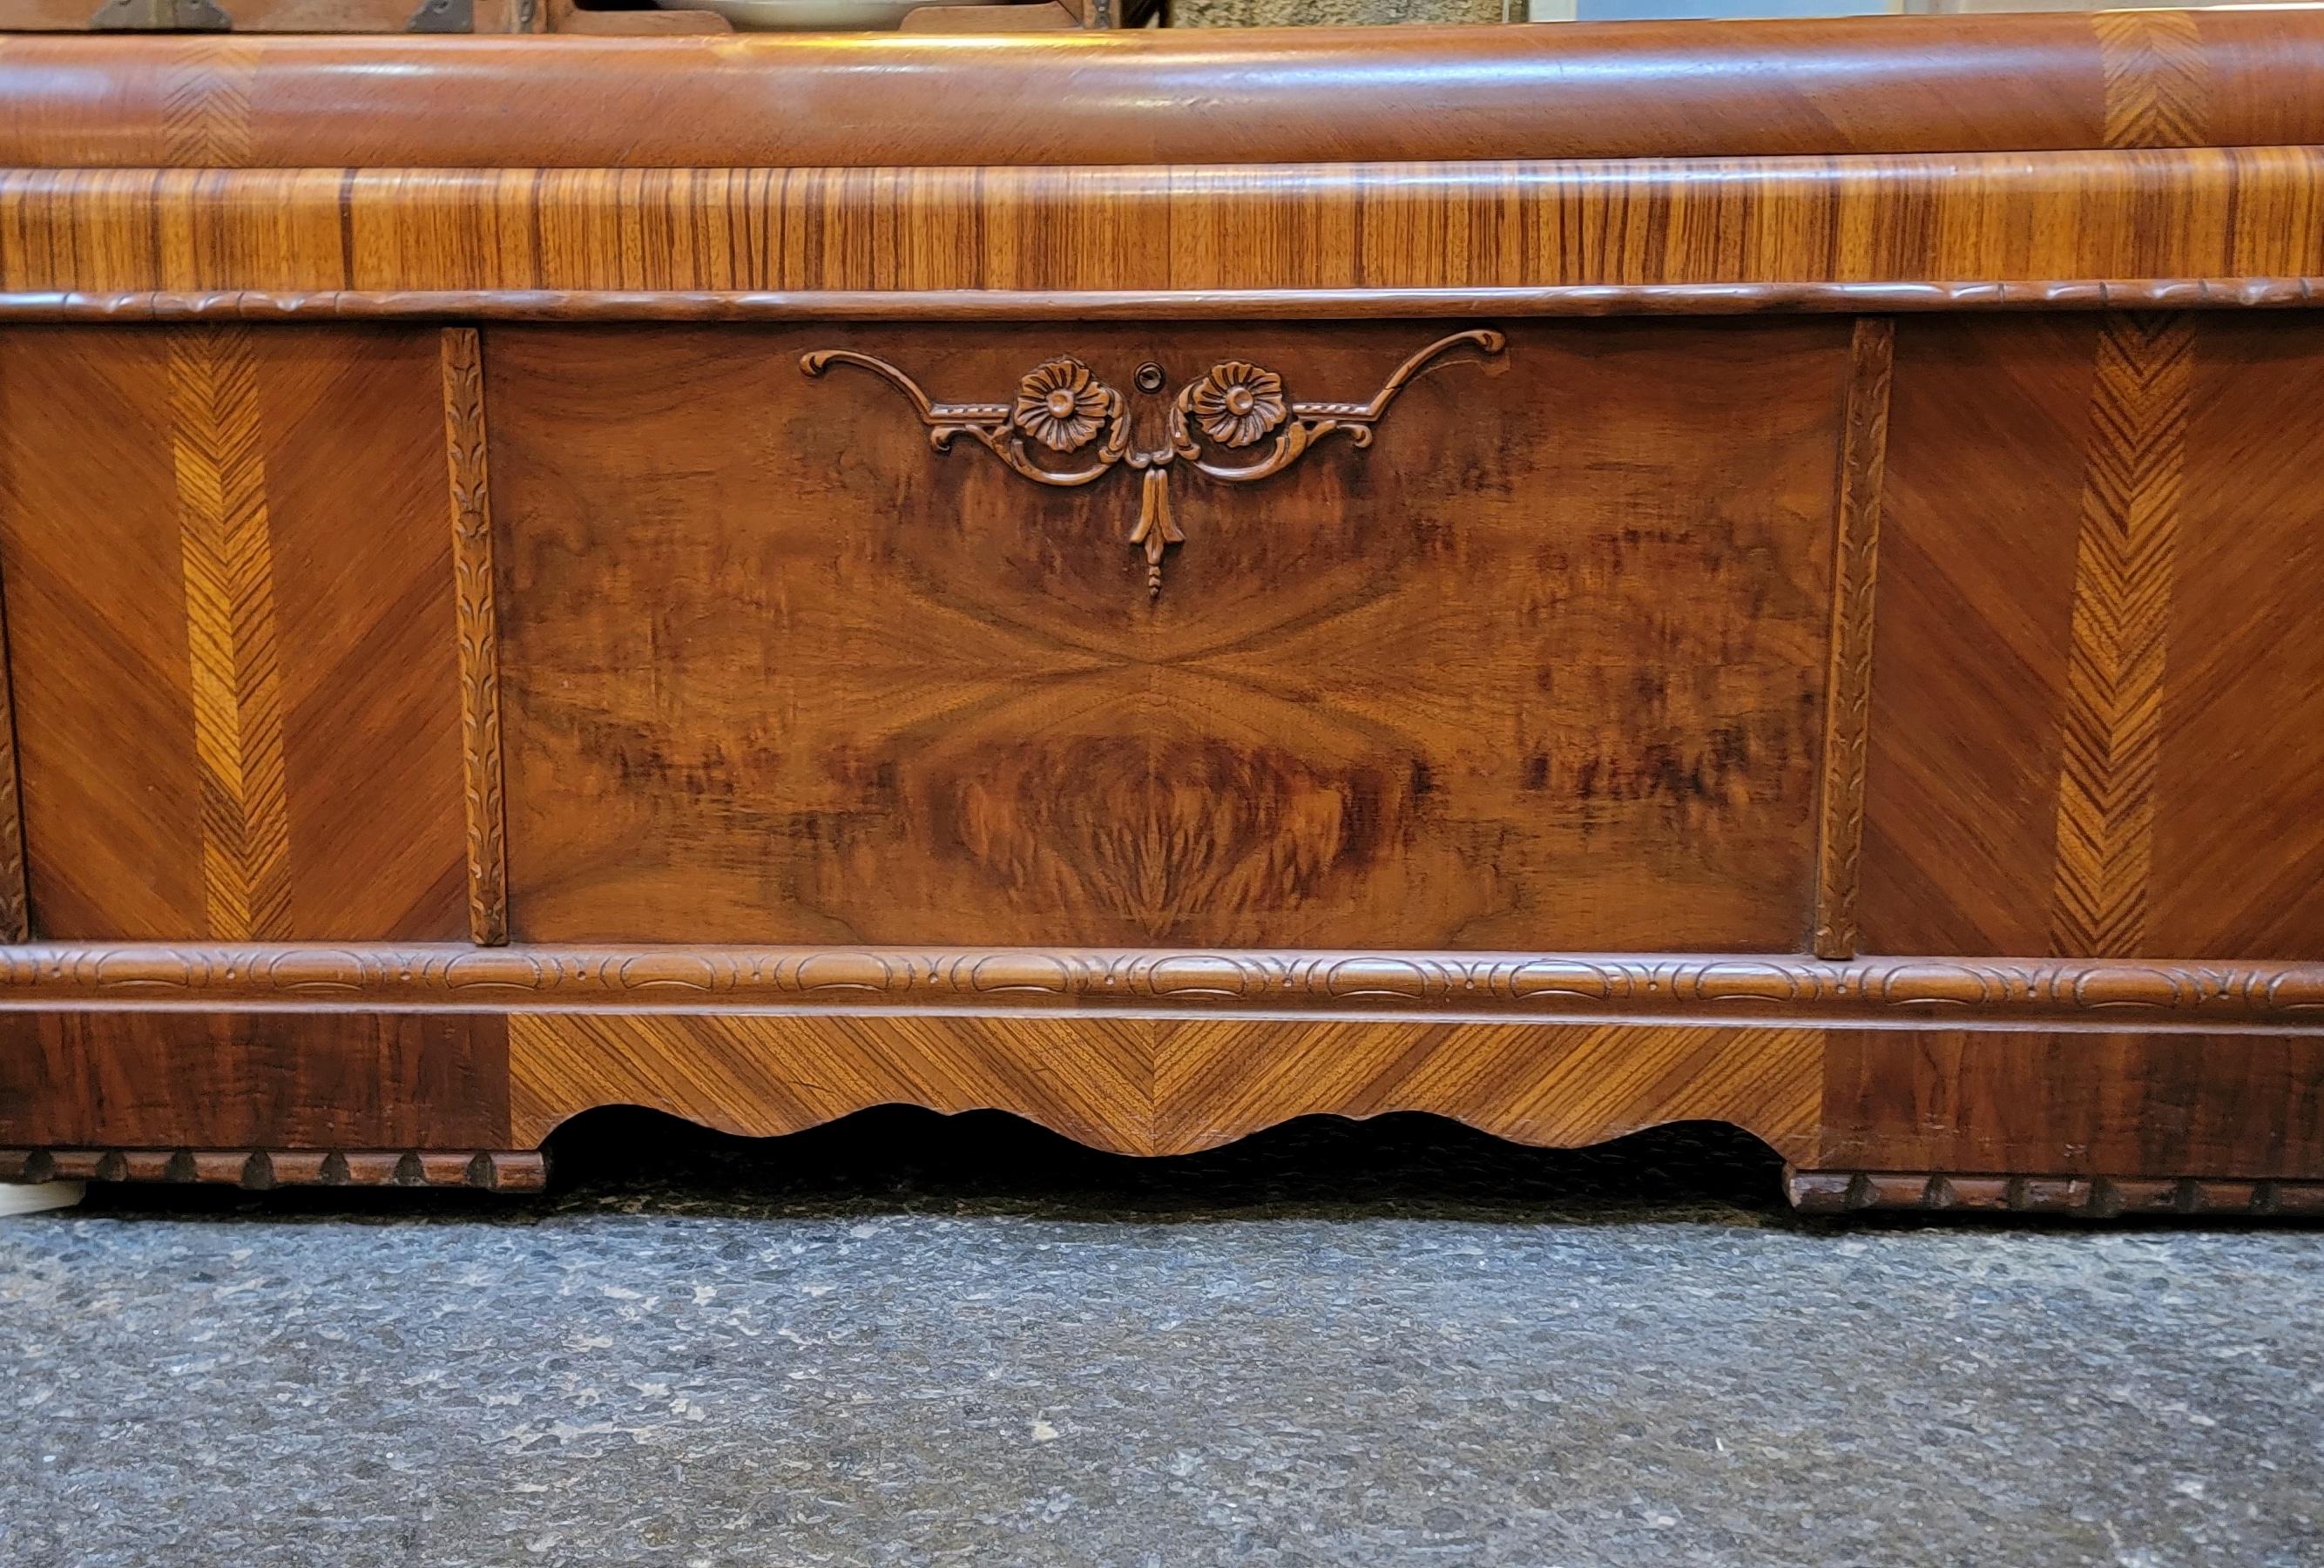 American Art Deco Style Cedar Chest / Trunk by Ed Roos Company 1940's